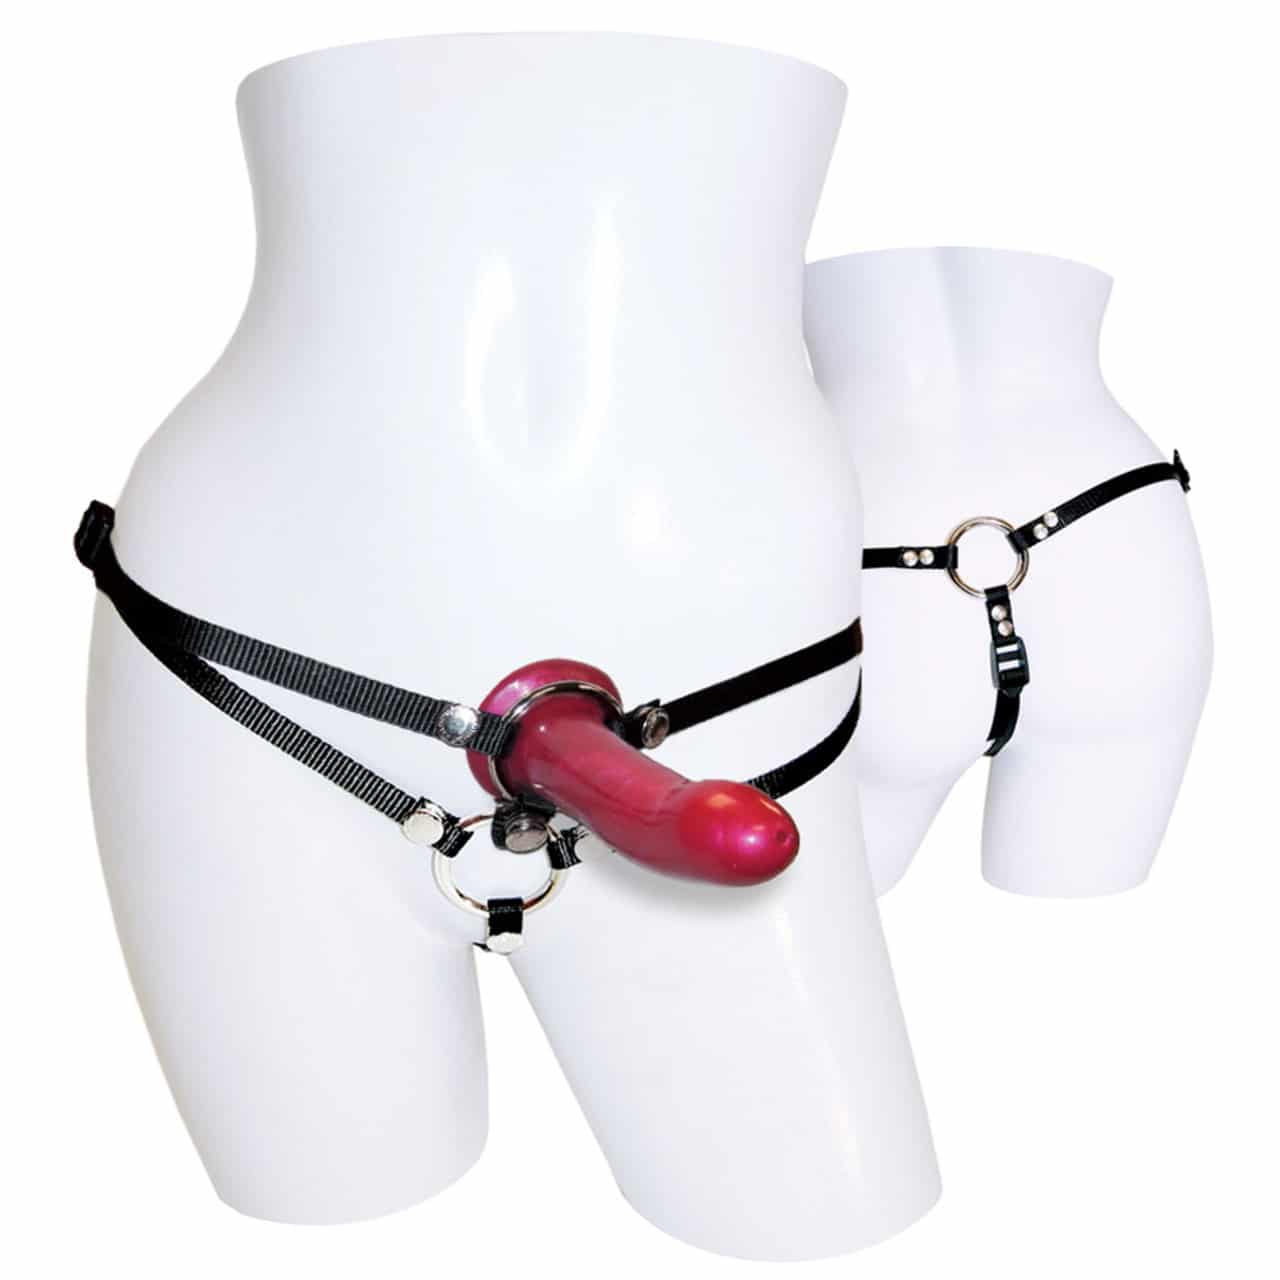 Menage a Trois for Two Strap-On Kit. Slide 2